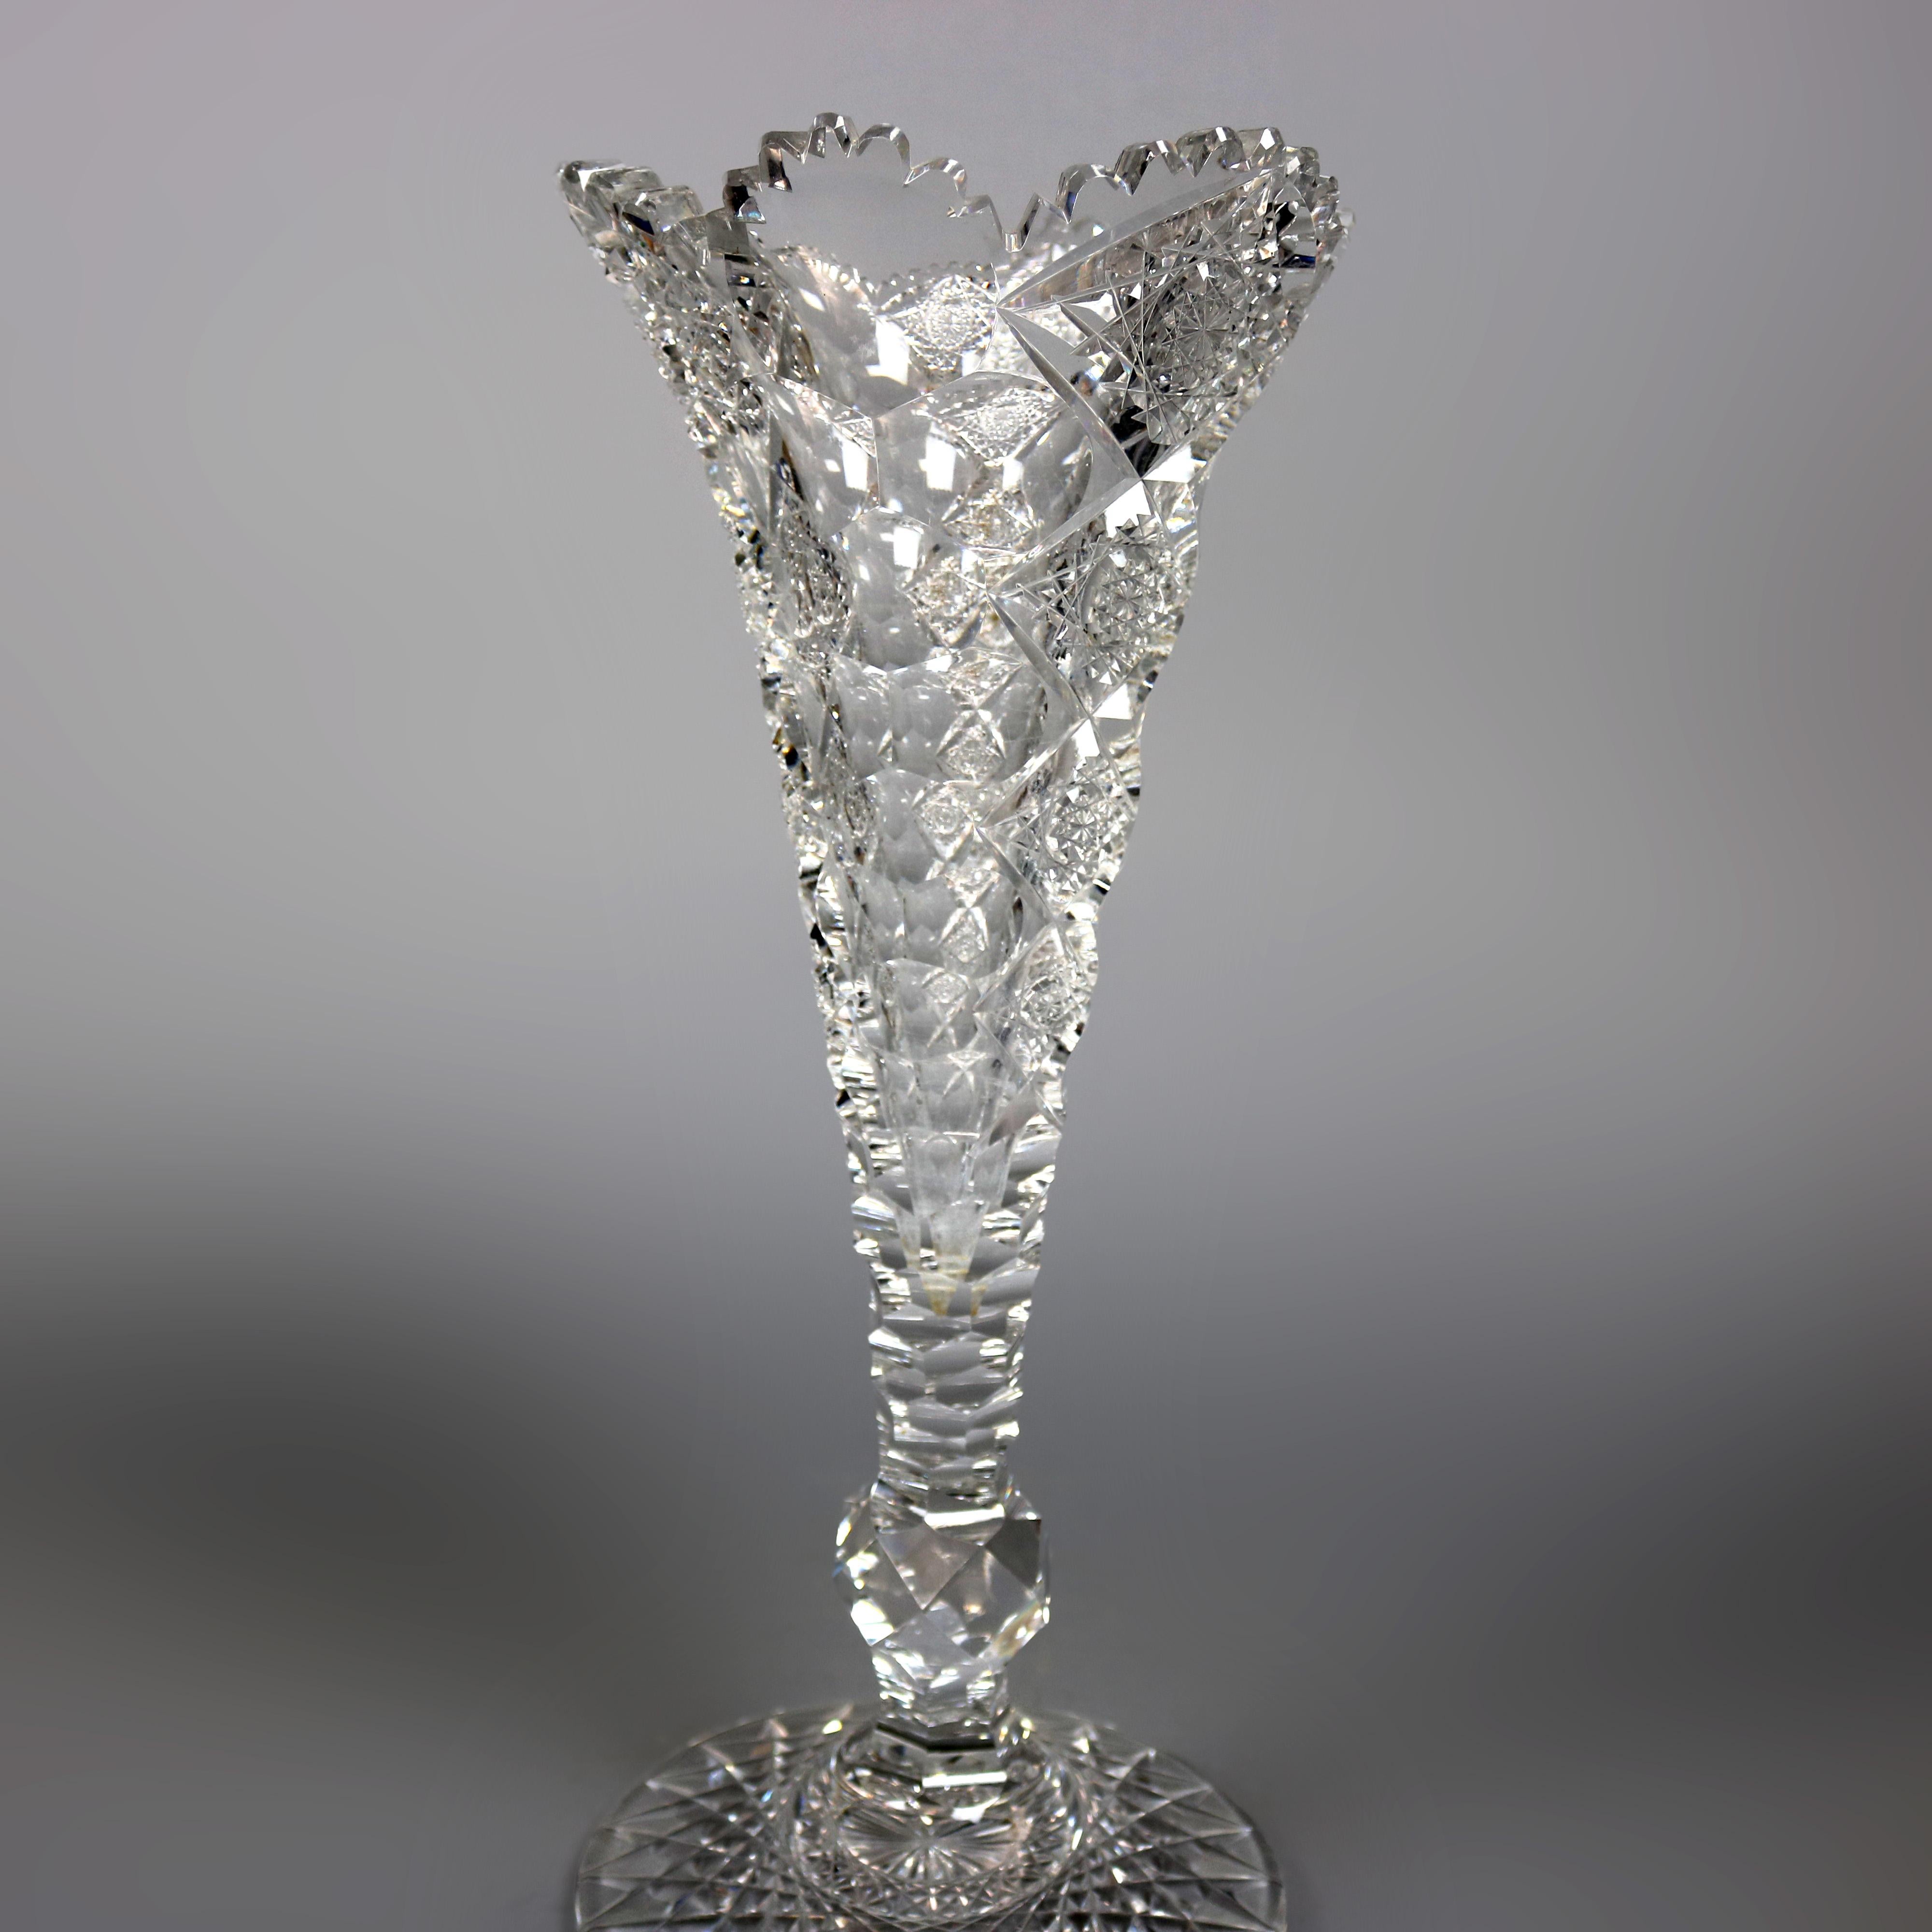 An antique and large cut glass vase by Hawkes offers footed trumpet form in Queens Pattern, circa 1900

Measures: 15.13